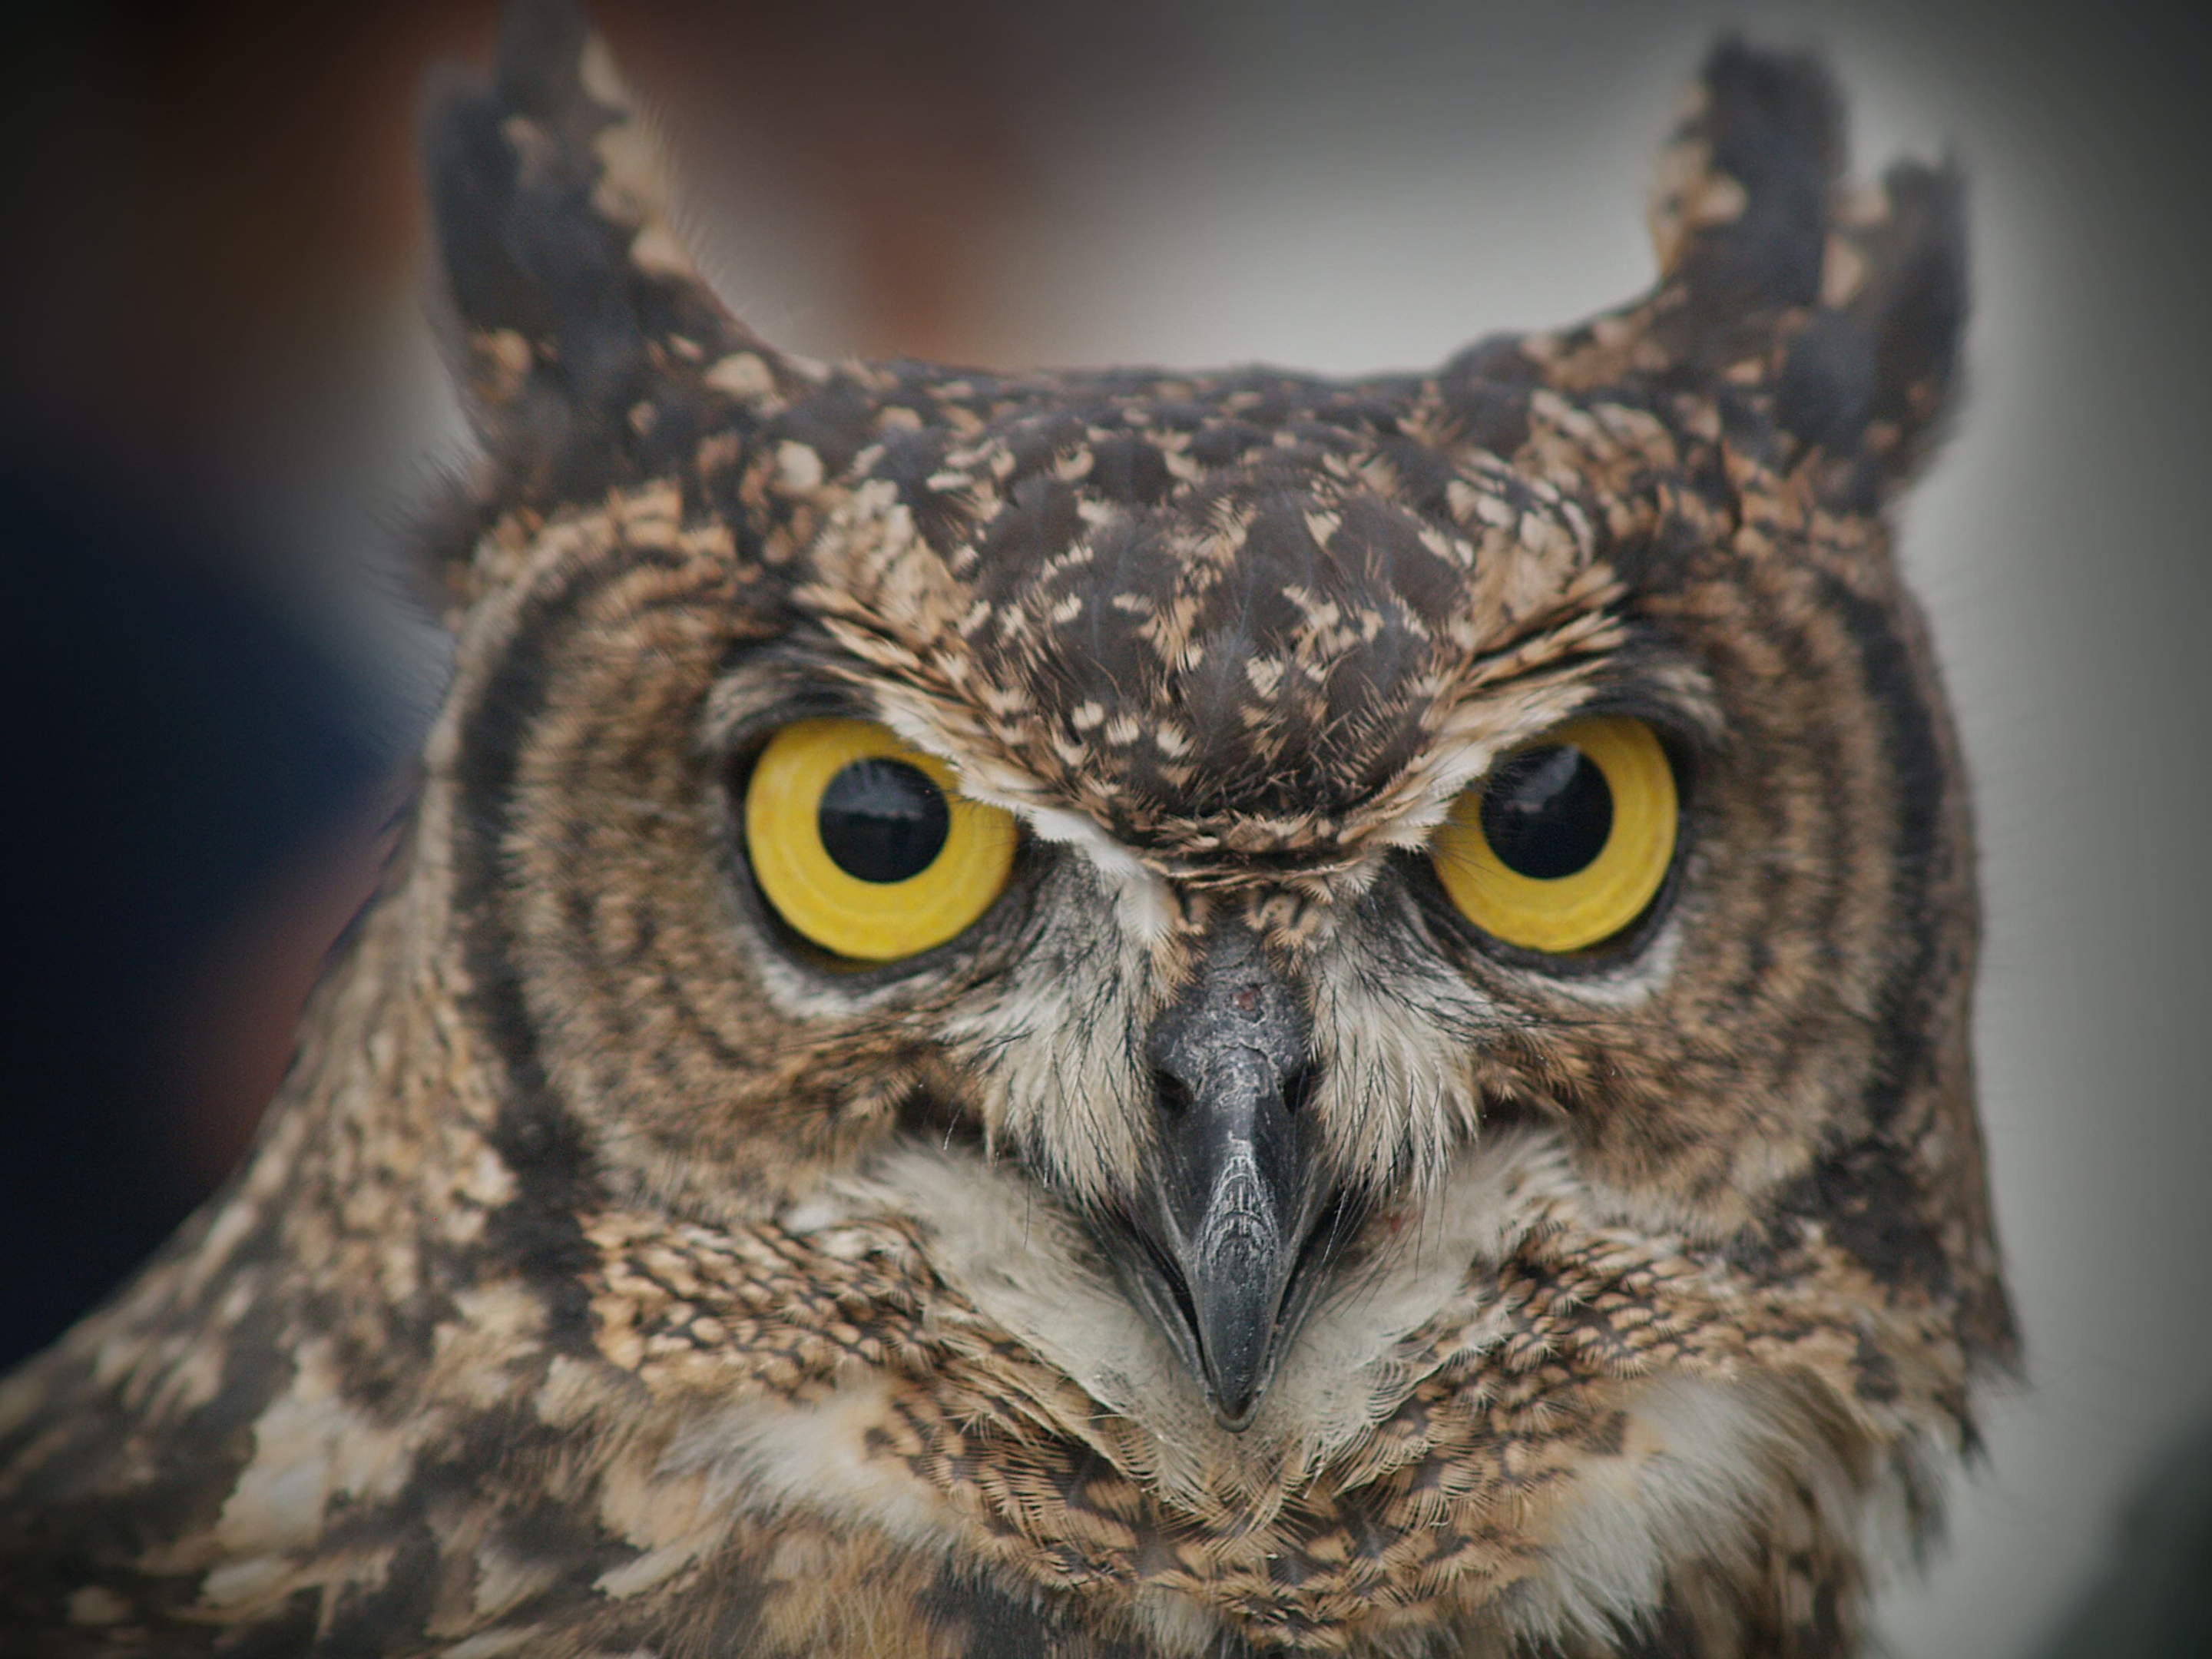 What does it mean when you see an owl?